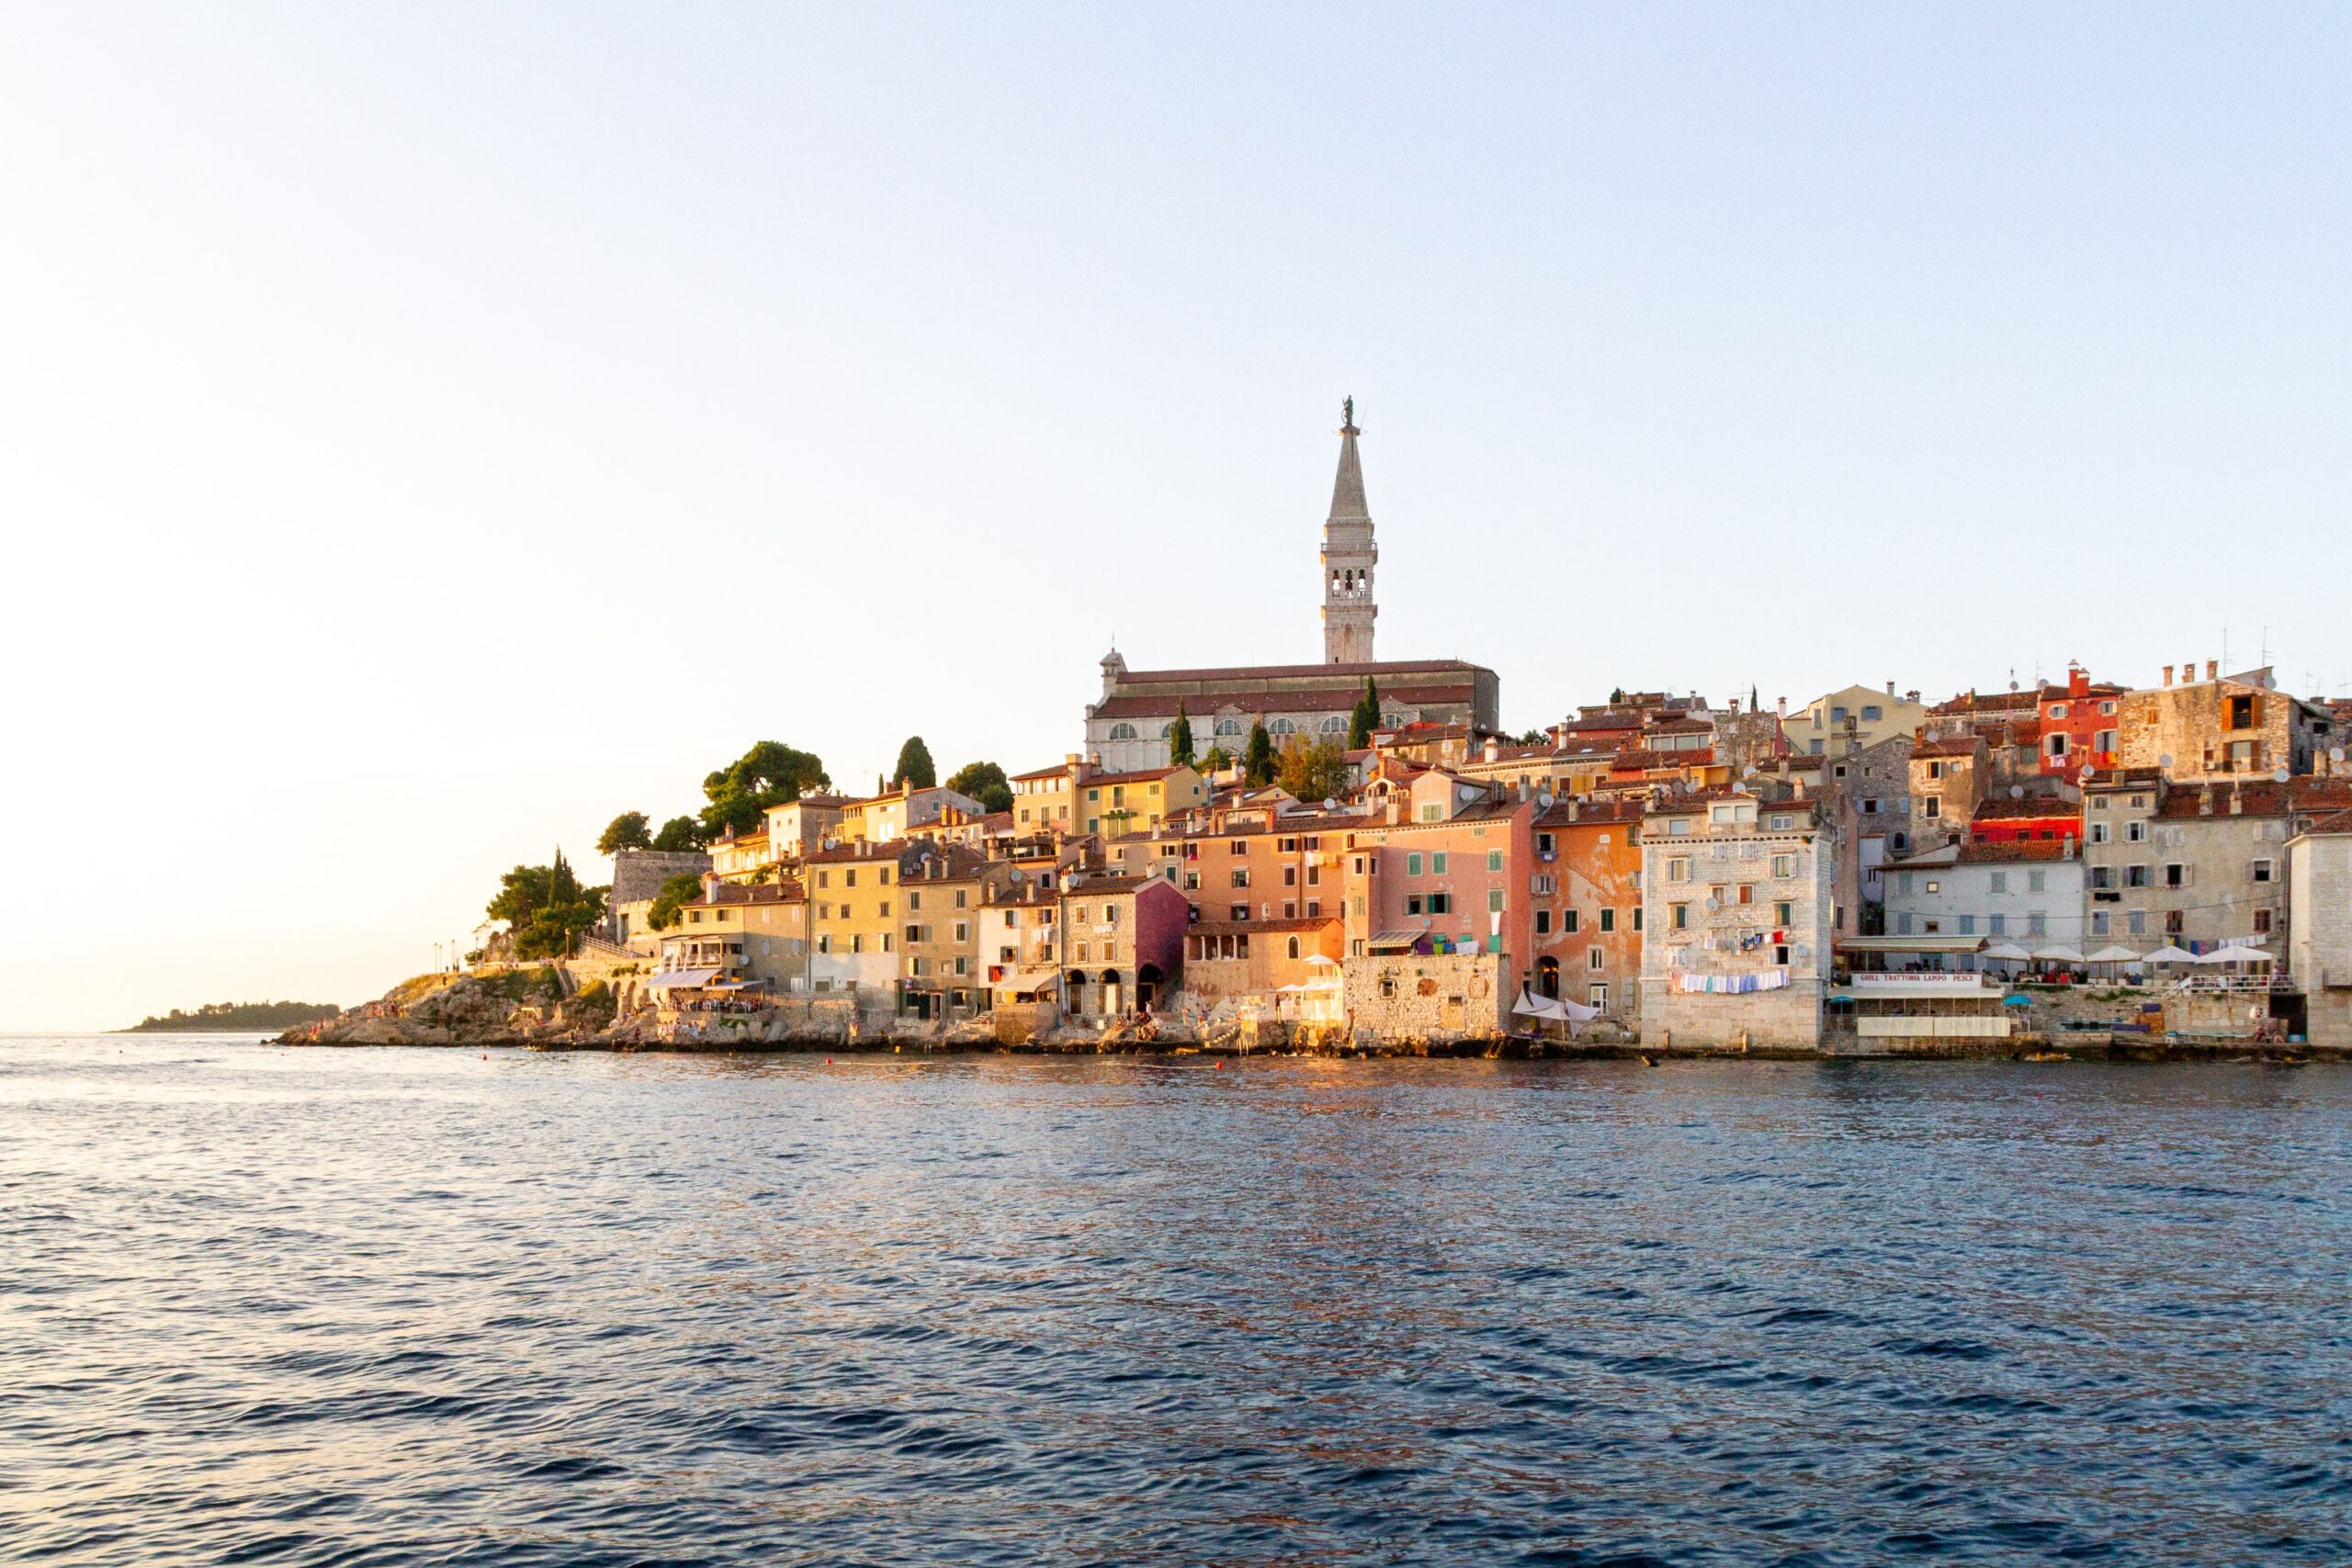 Beautiful Rovnij As Part Of Our 7 Day Secrets Of Zagreb & Istrian Coast Tour Package